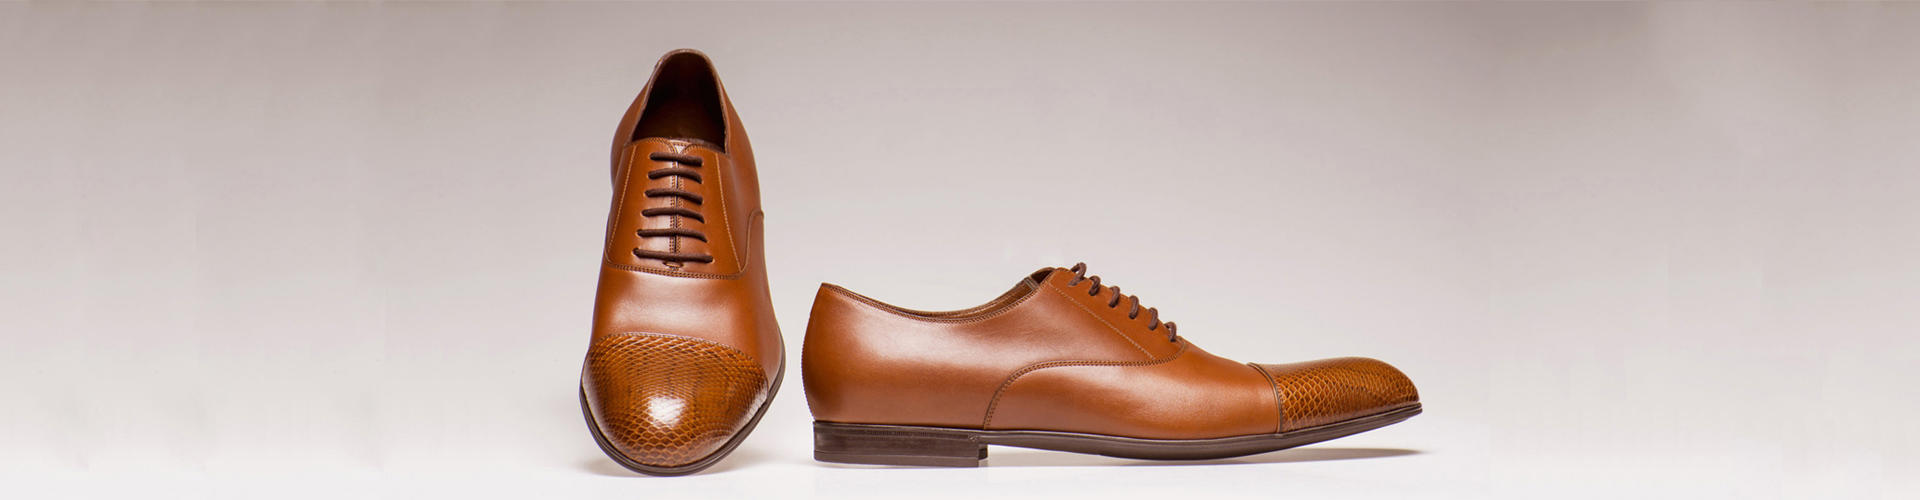 formal and casual shoe outsoles for business and show